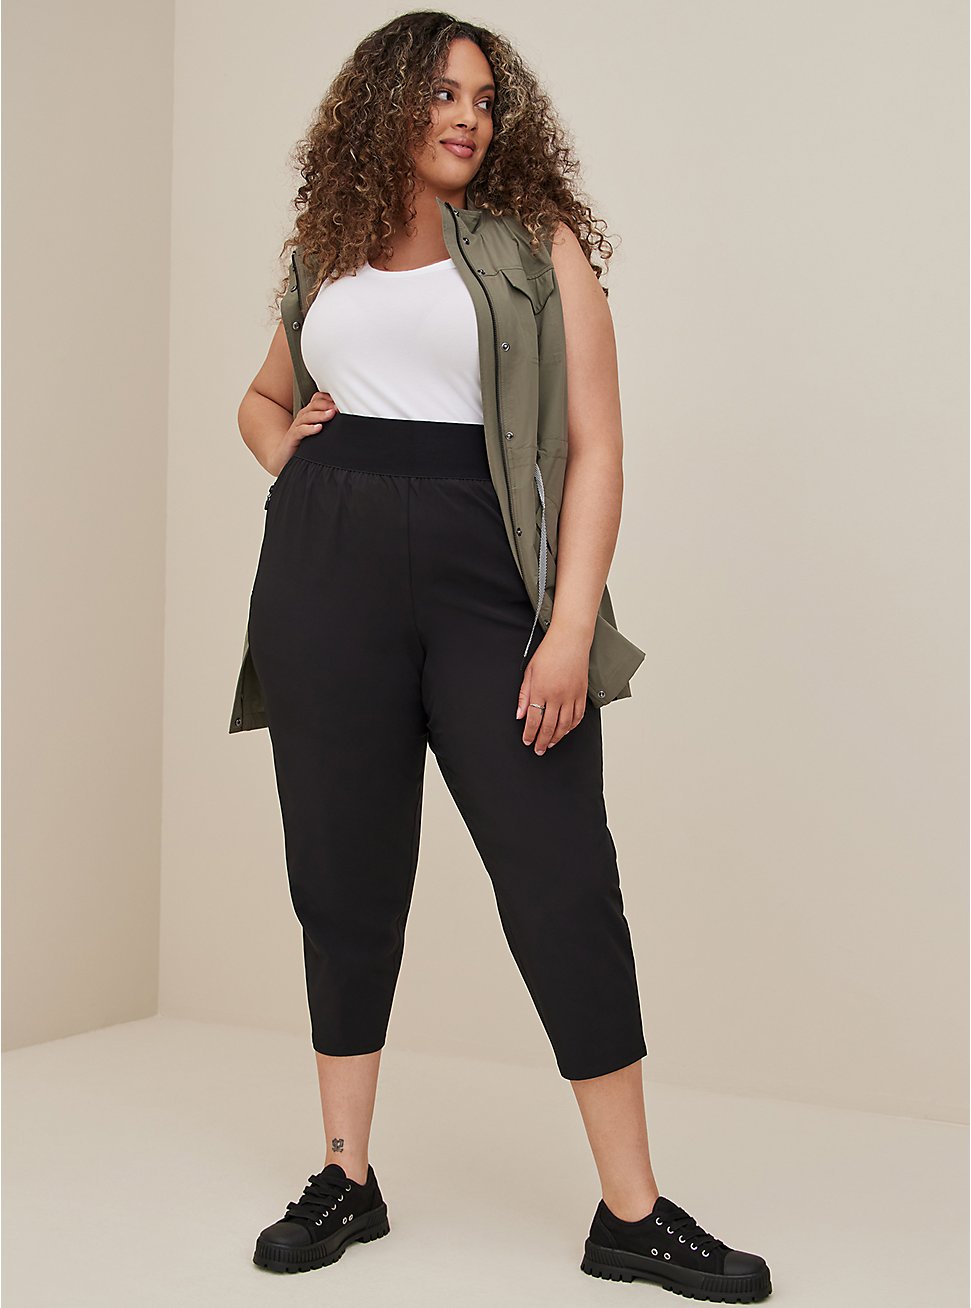 Plus Size Happy Camper Relaxed Walking Pant - Stretch Woven Black, DEEP BLACK, hi-res